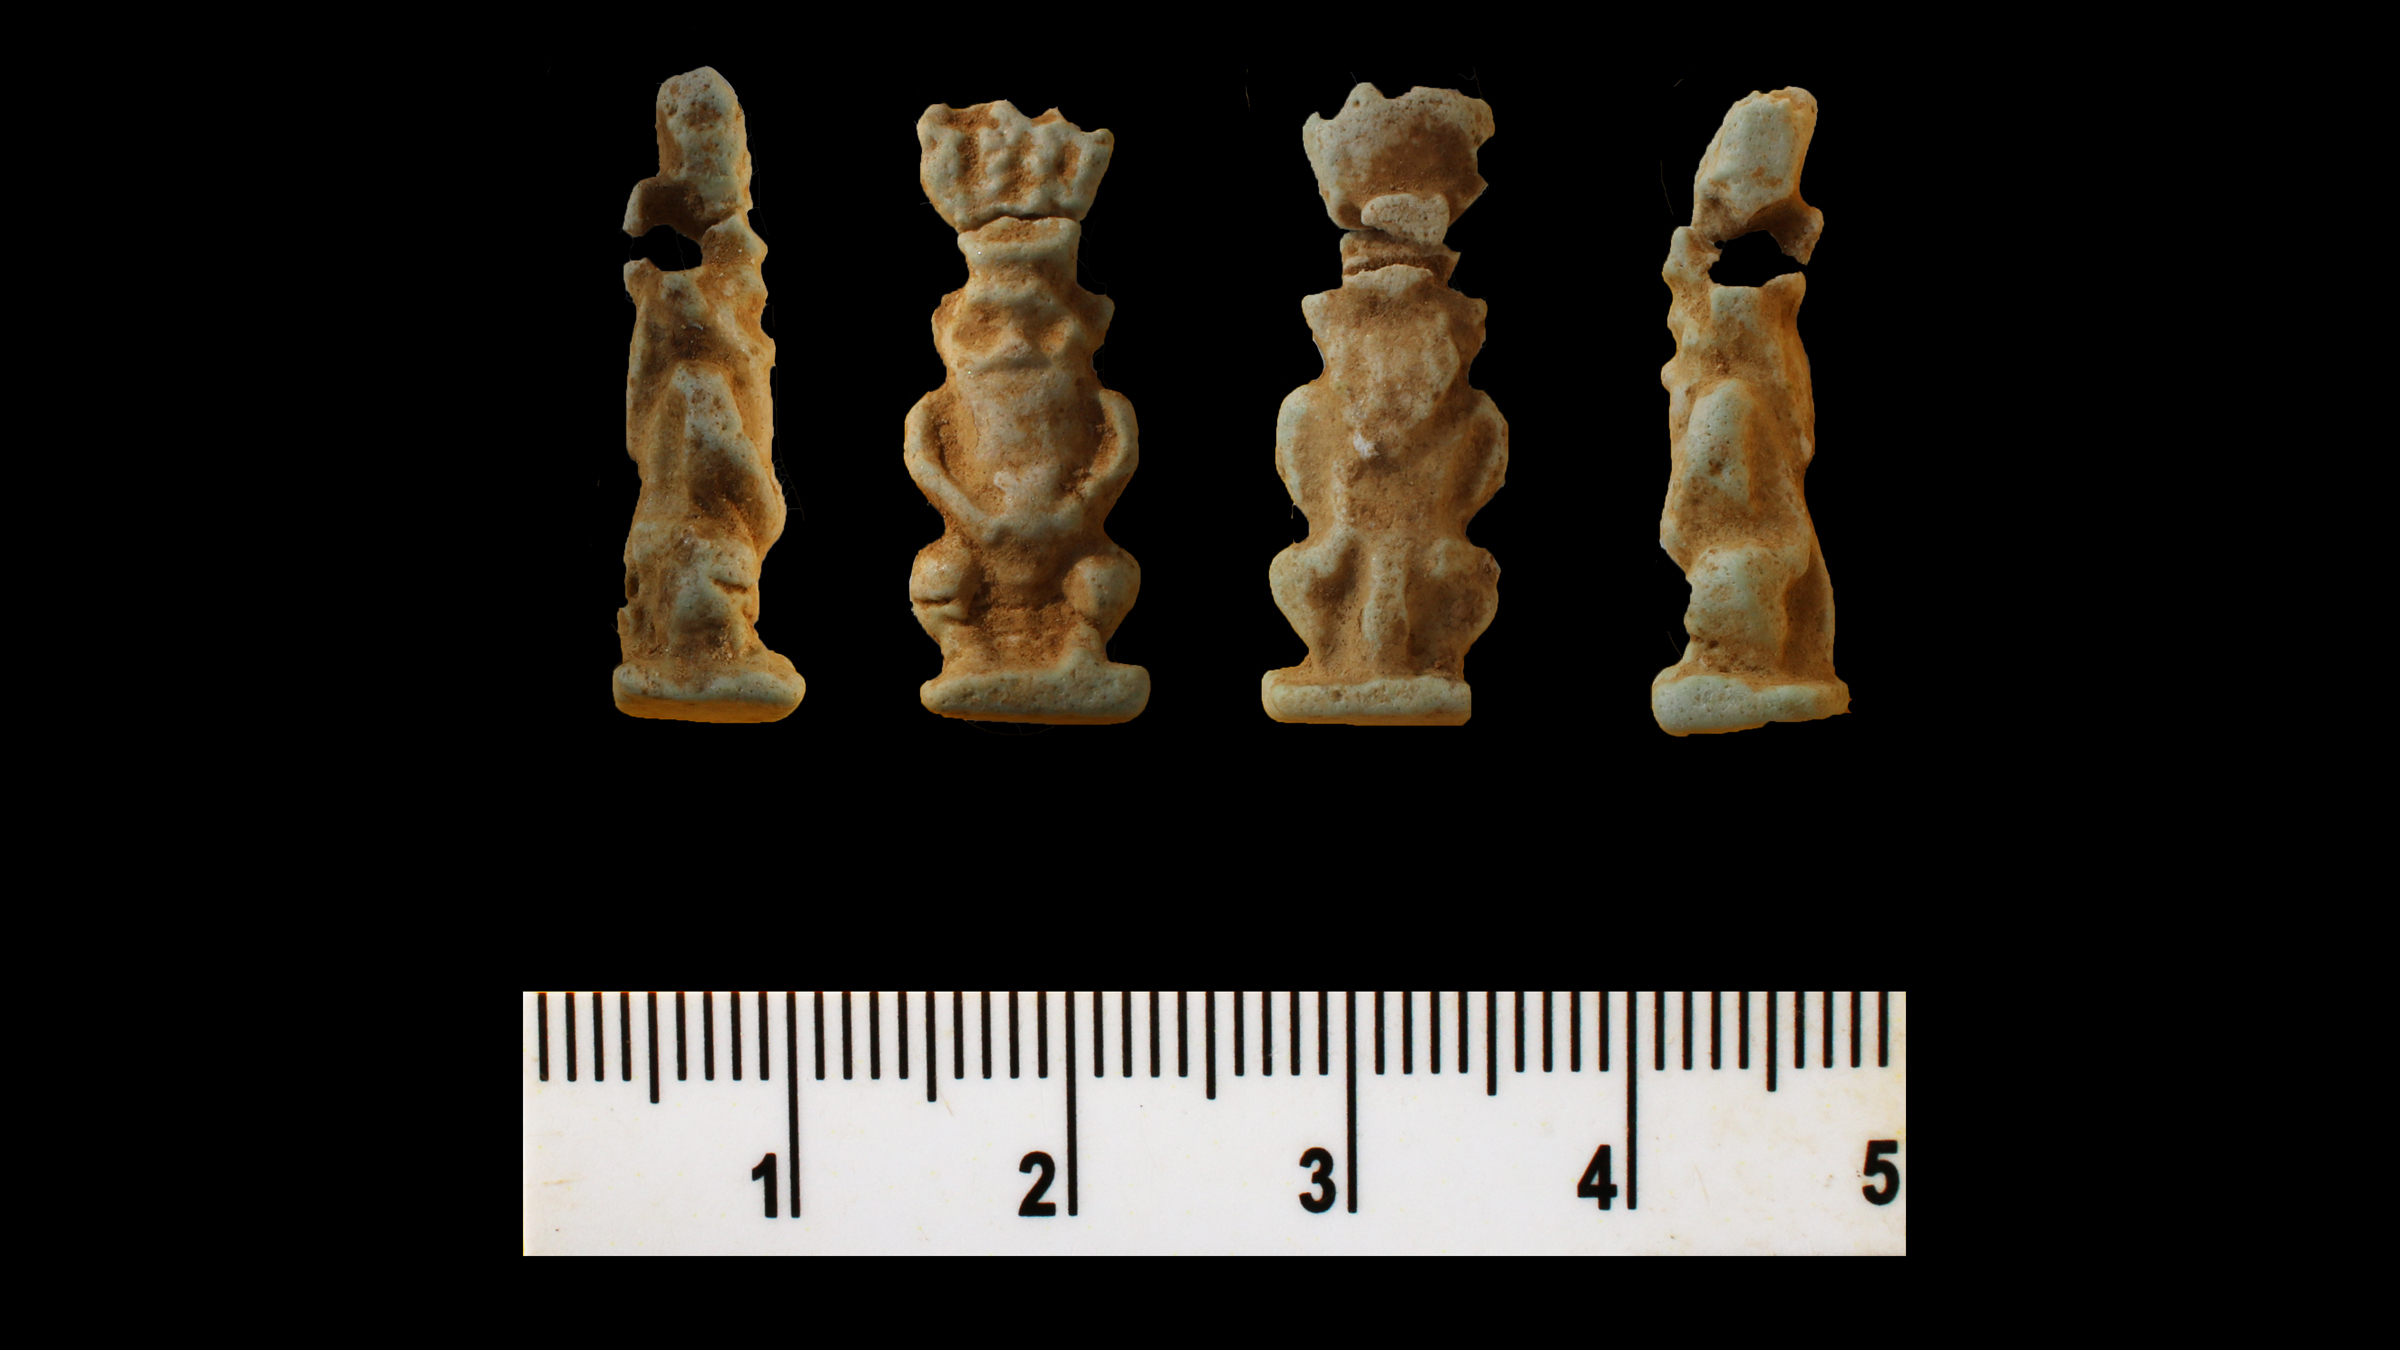 Egyptian amulets above a ruler